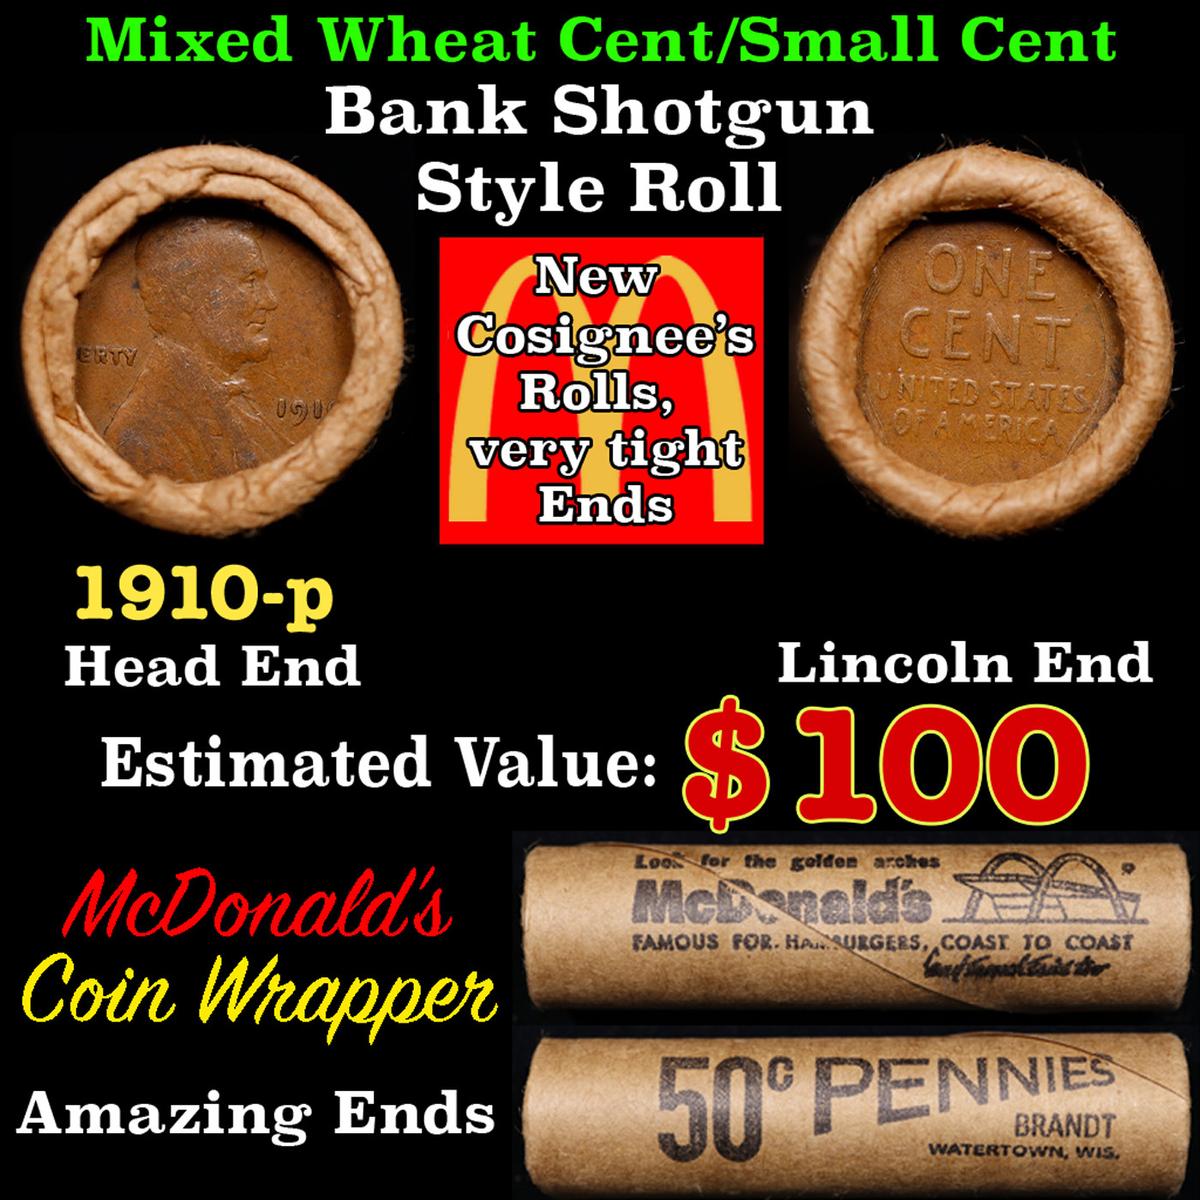 Lincoln Wheat Cent 1c Mixed Roll Orig Brandt McDonalds Wrapper, 1910-p end, Wheat other end